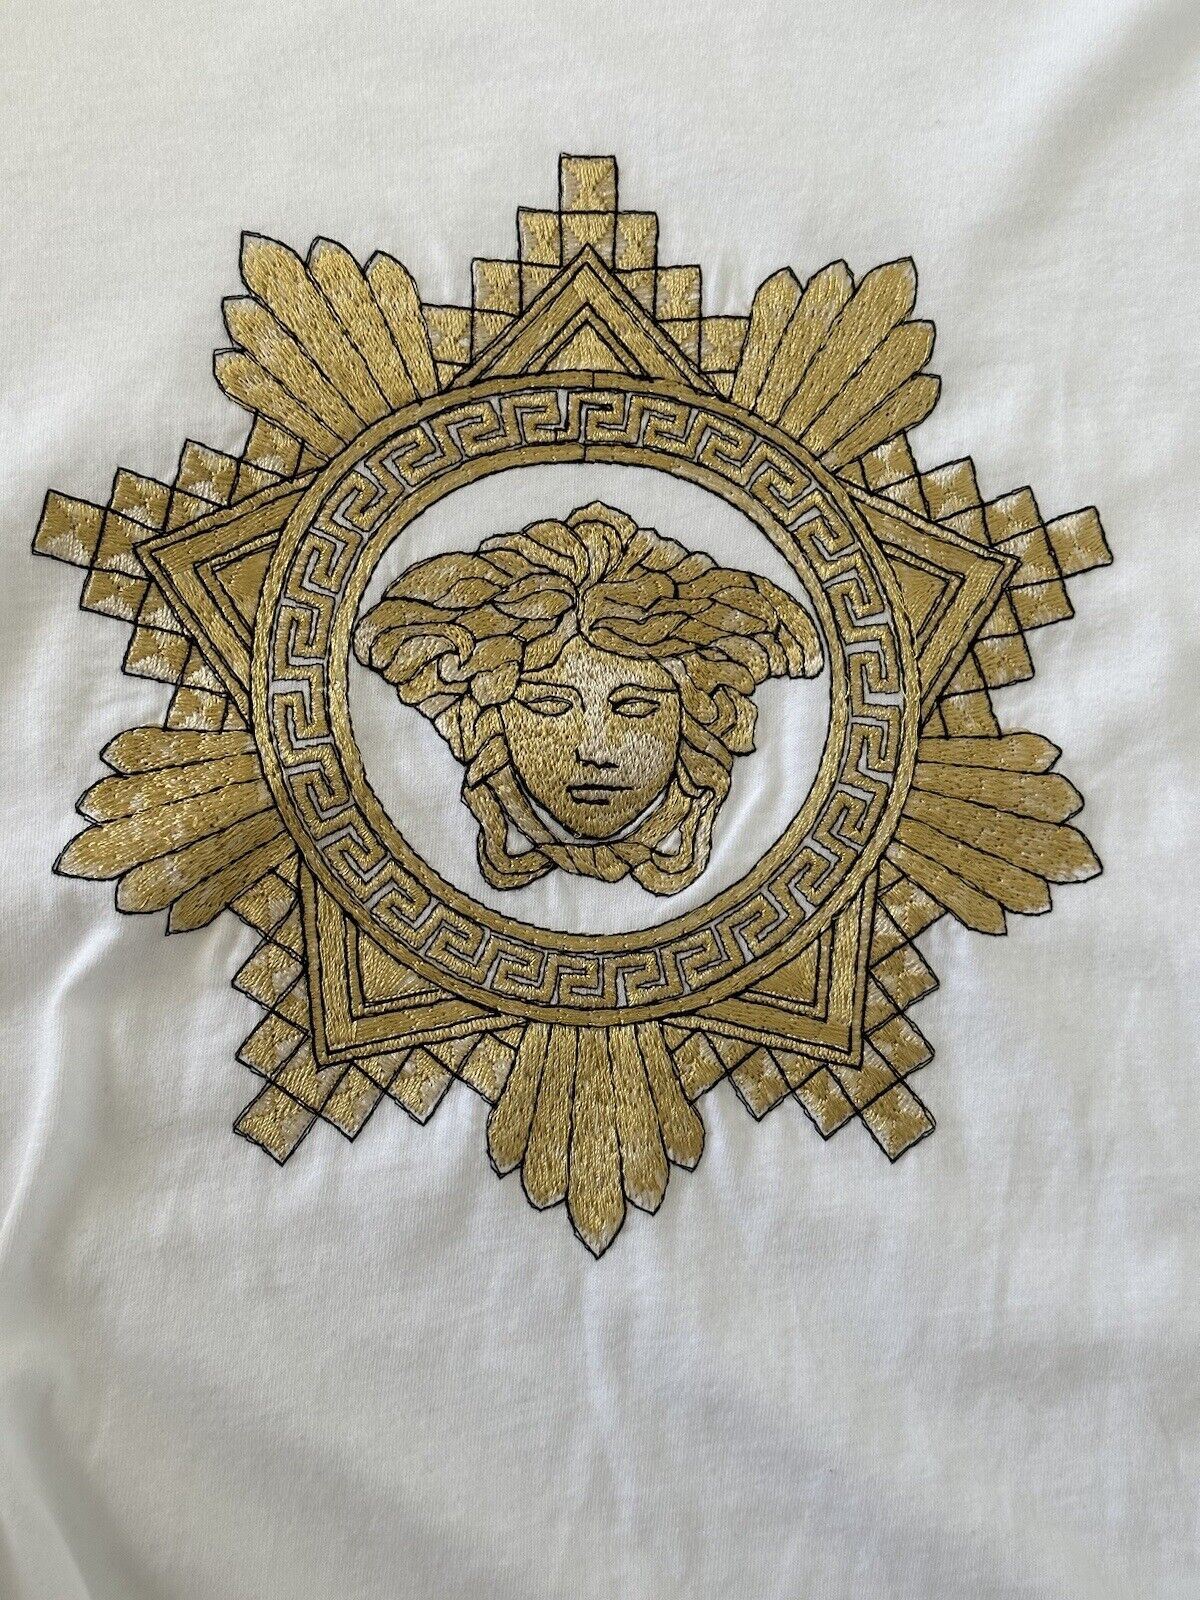 NWT $850 Versace Medusa Embroidery White Jersey T-Shirt 5XL A89499S Italy